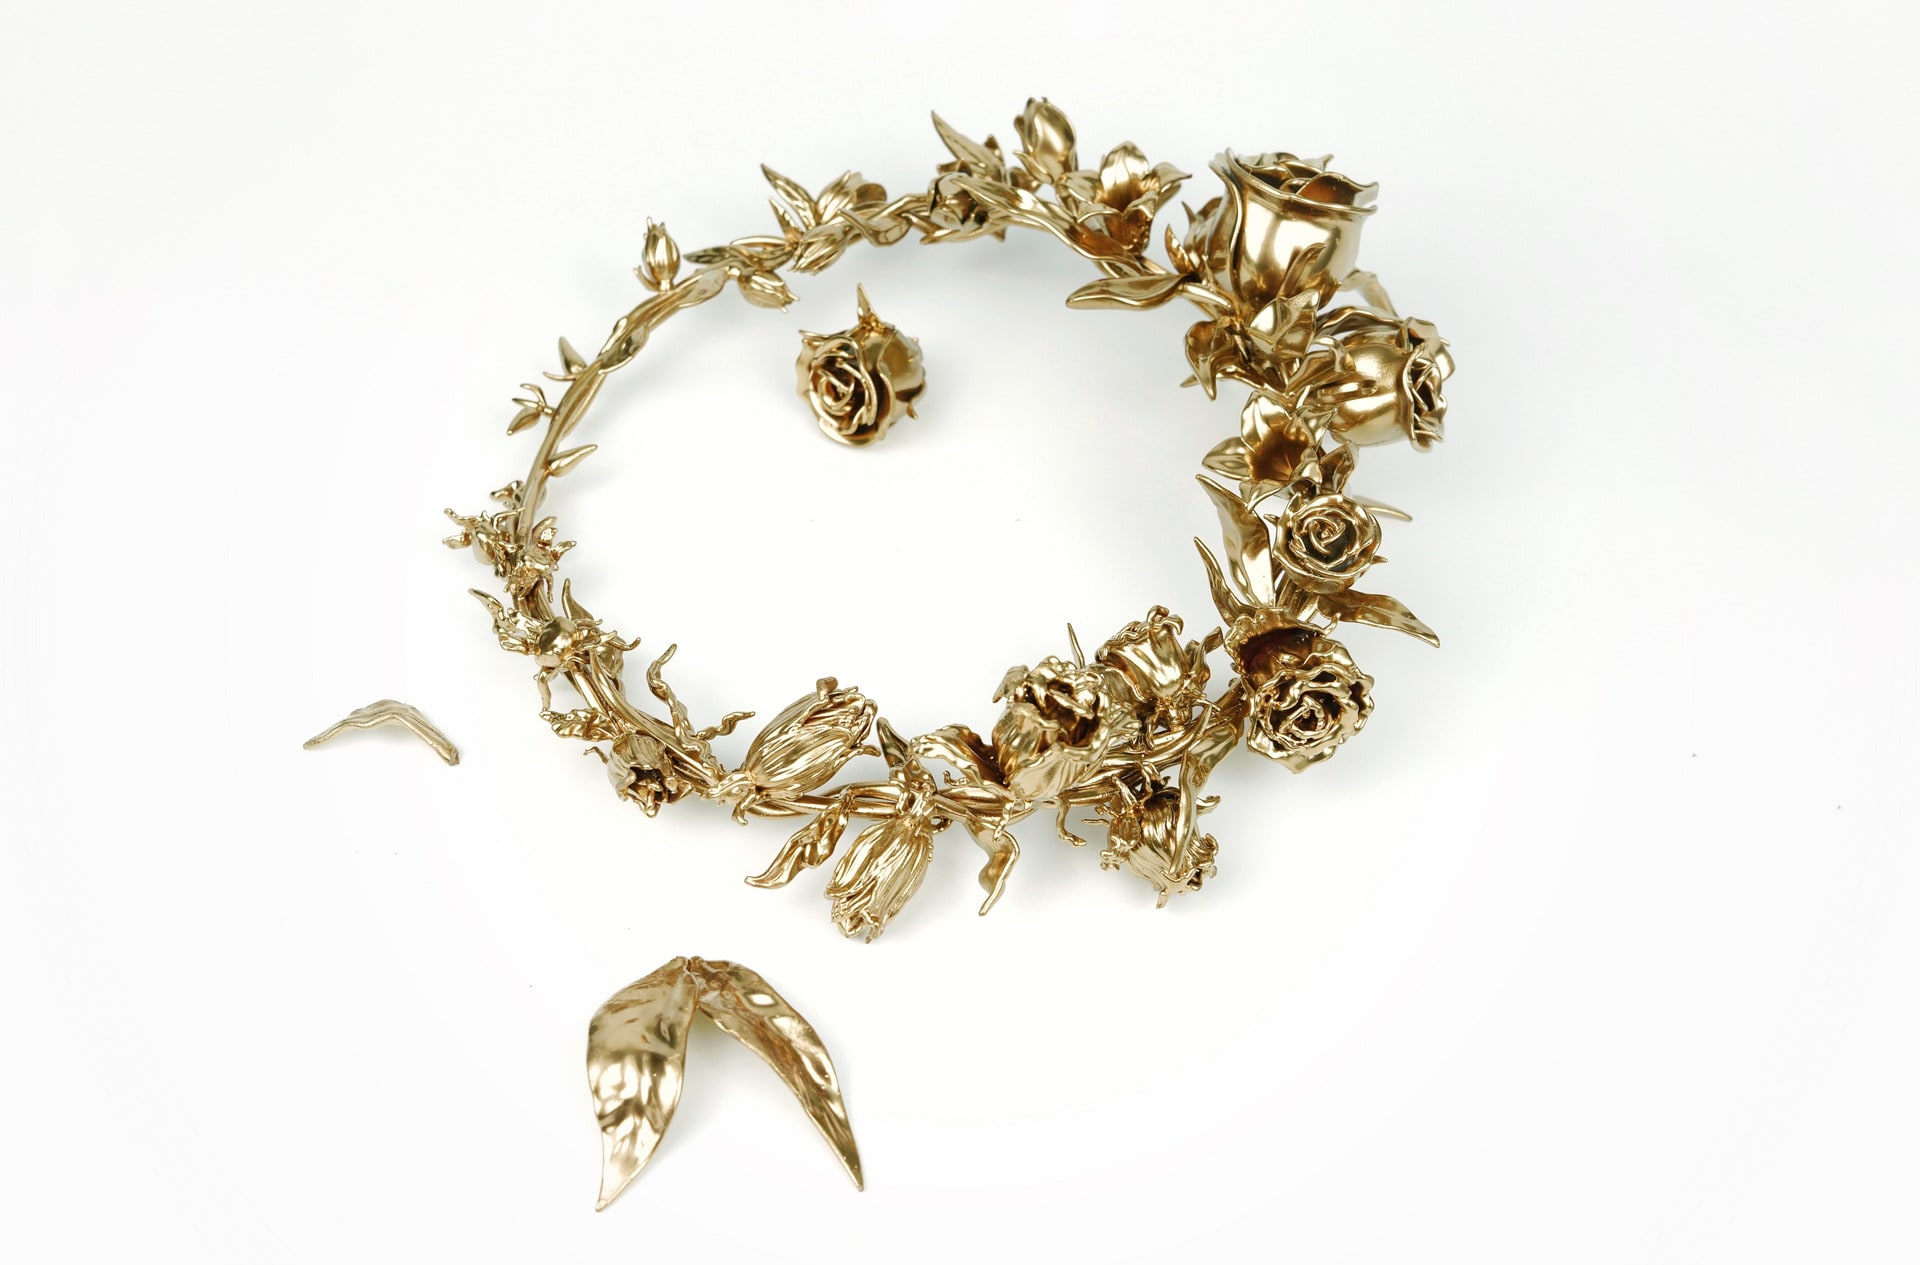 A cyclical wreath made of brass embodying the cycle of bloom to decay.